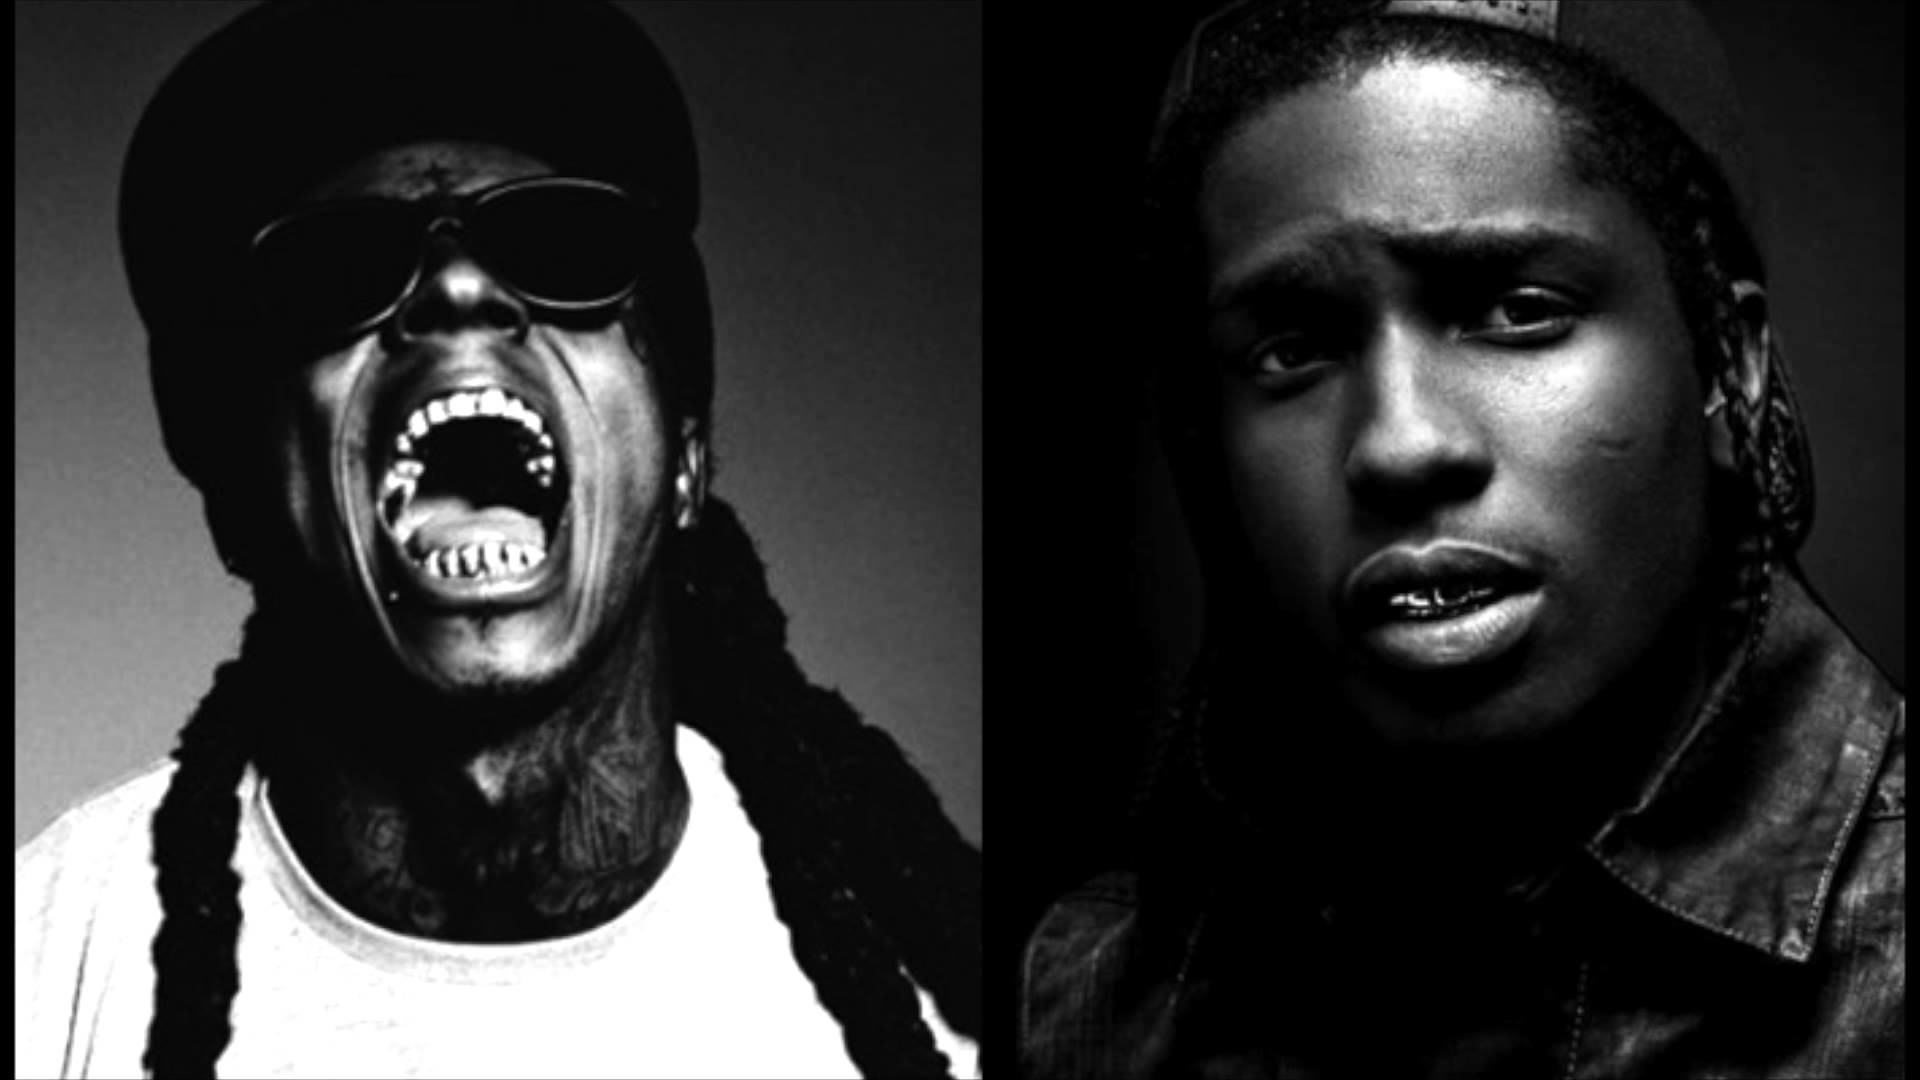 Too Ill Lil Wayne / ASAP Rocky Type Beat Free Download Produced by Benstar – YouTube